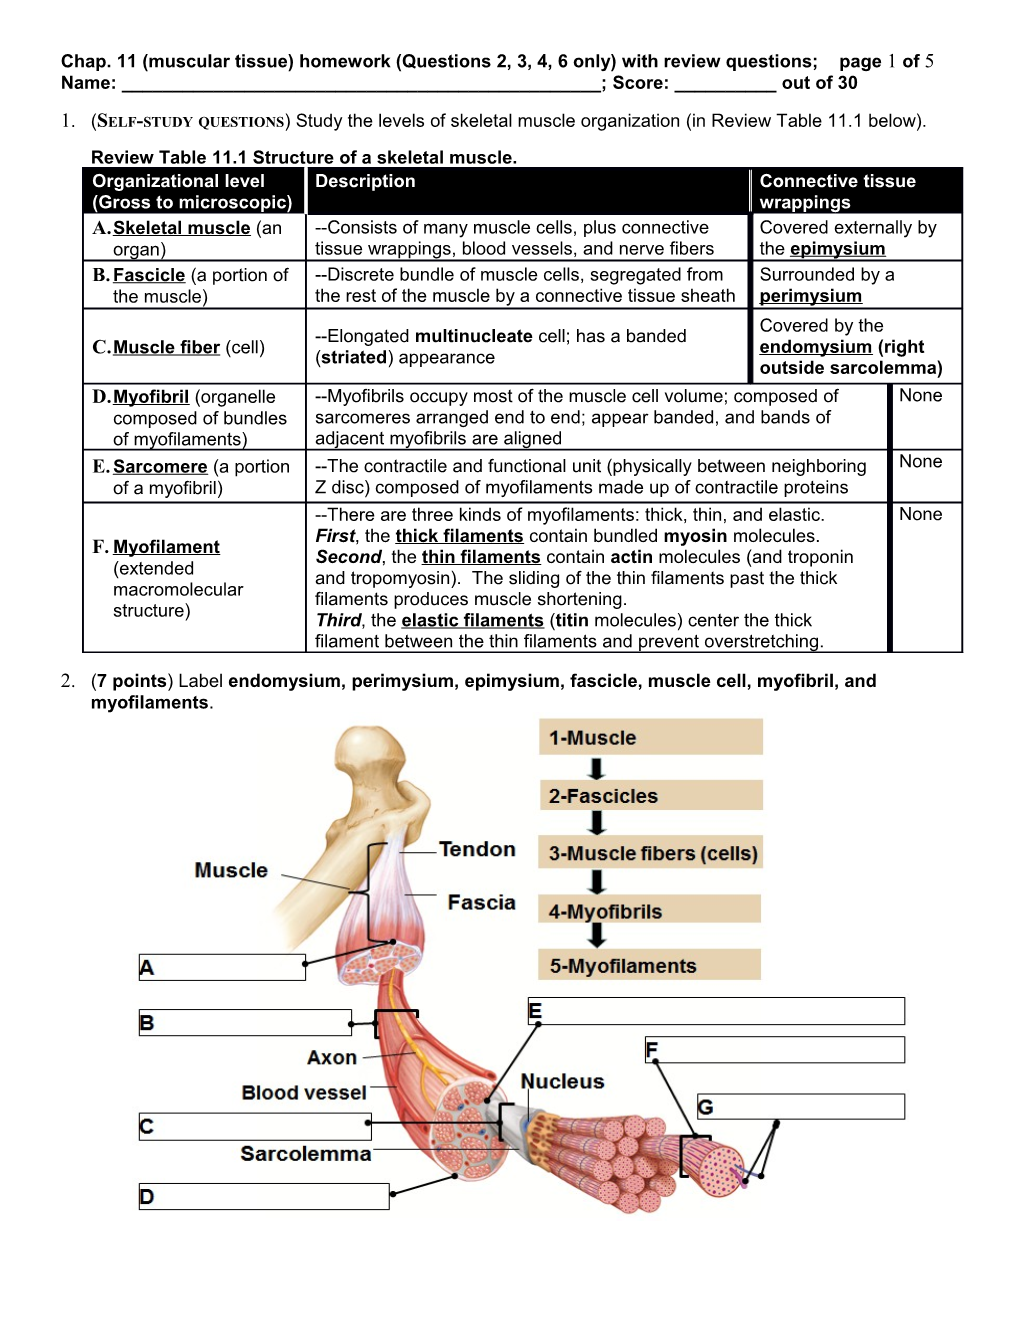 Chap. 11(Muscular Tissue)Homework(Questions 2, 3, 4, 6 Only) with Review Questions; Page